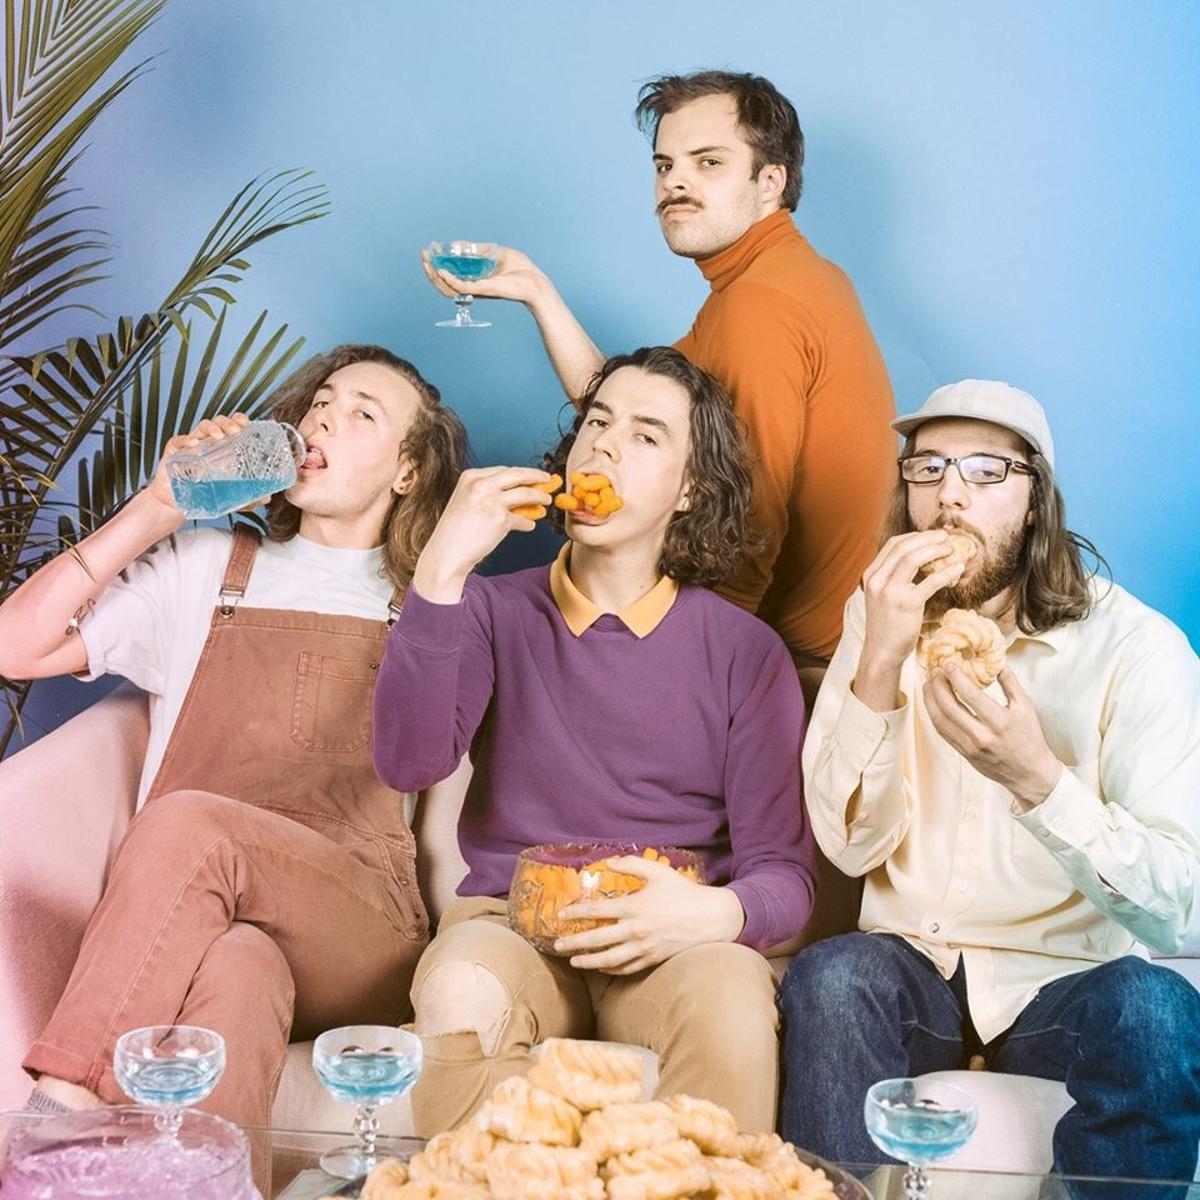 Peach Pit S Newest Album Has It All For You And Your Friends Reviews Yakimaherald Com